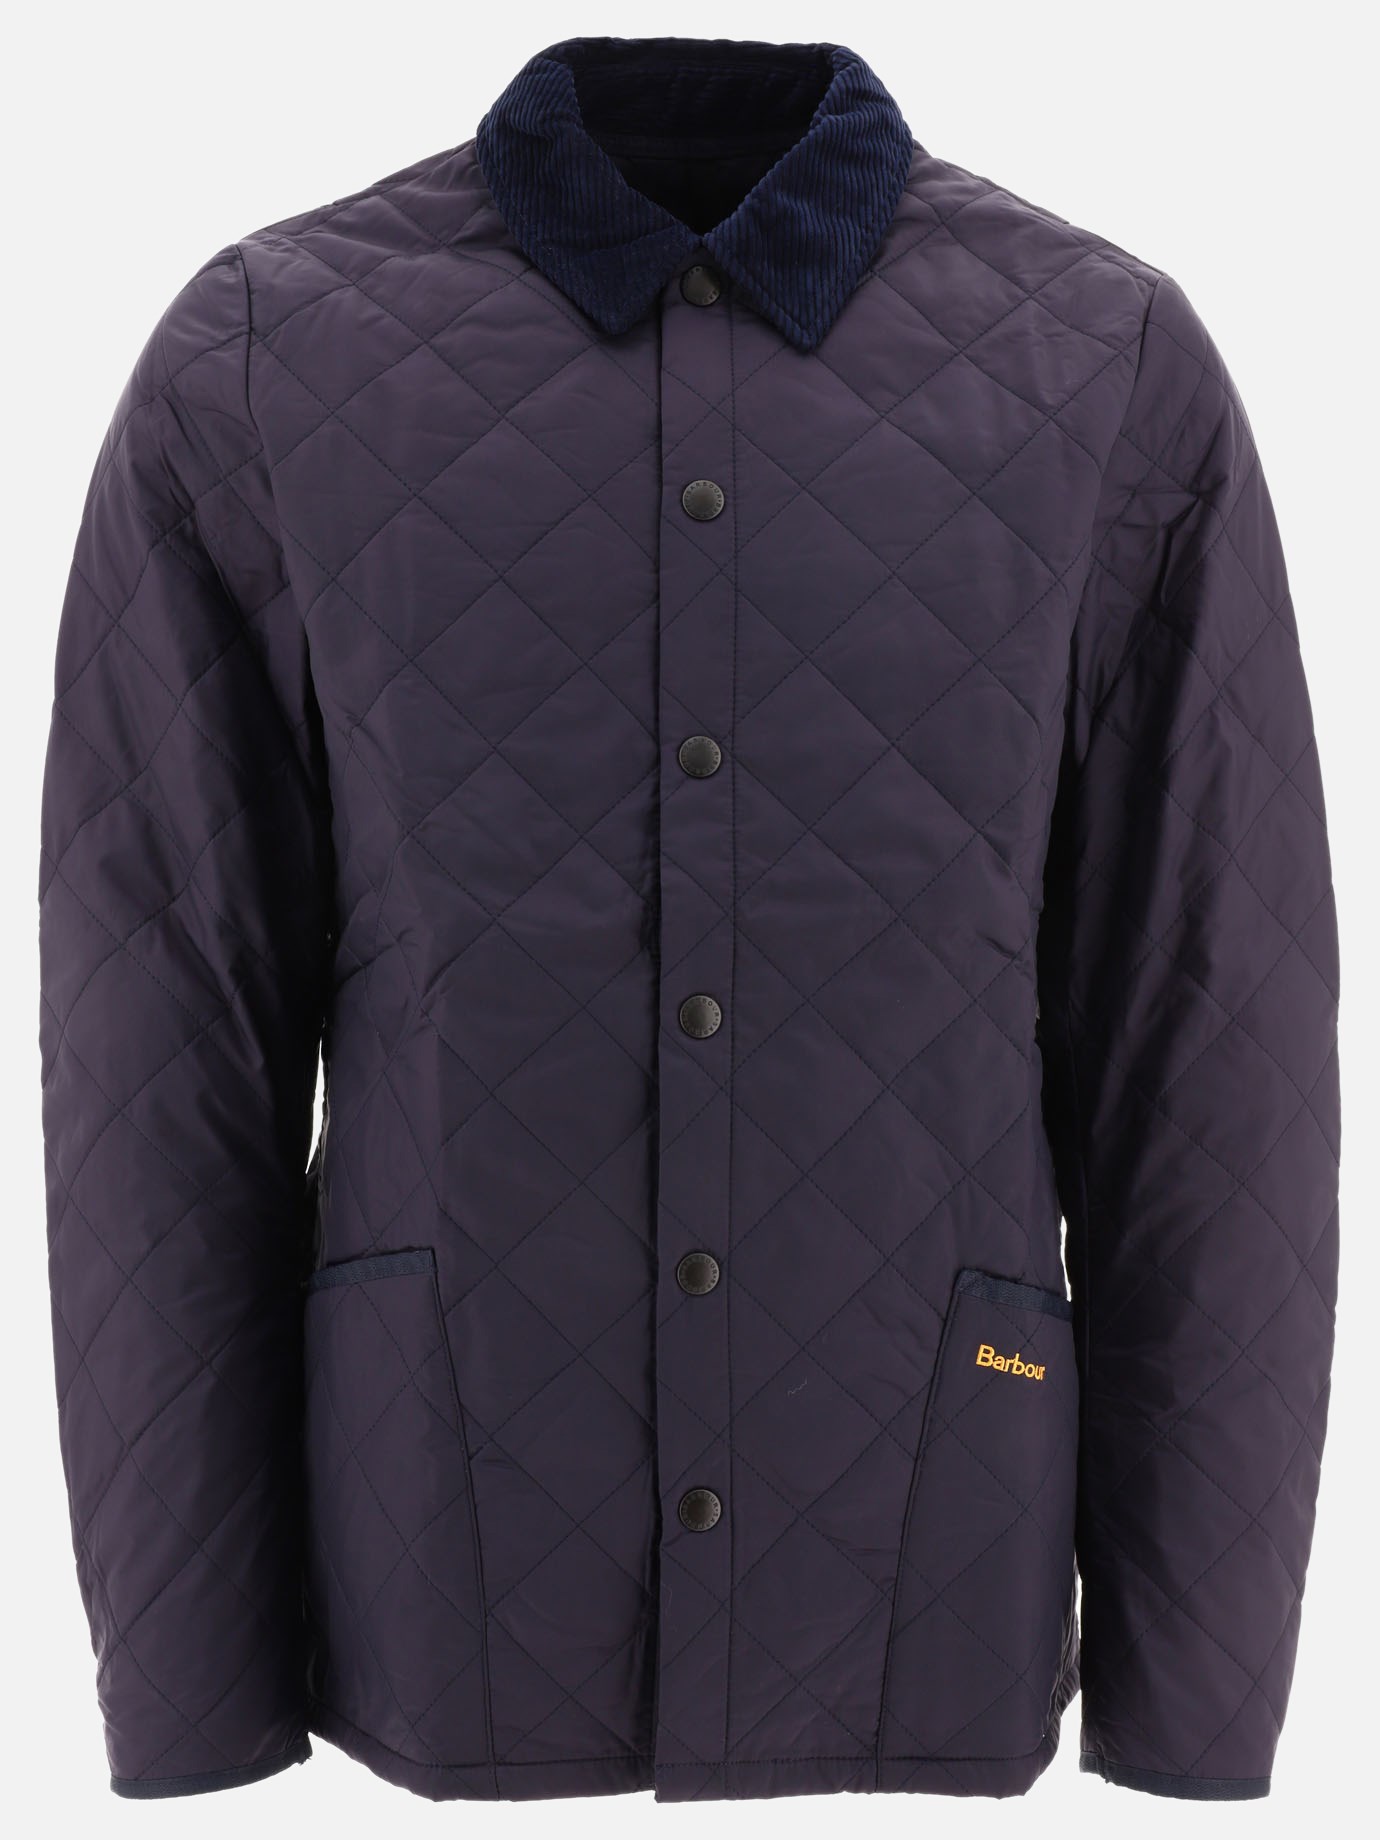  Heritage Liddesdale jacketby Barbour - 2